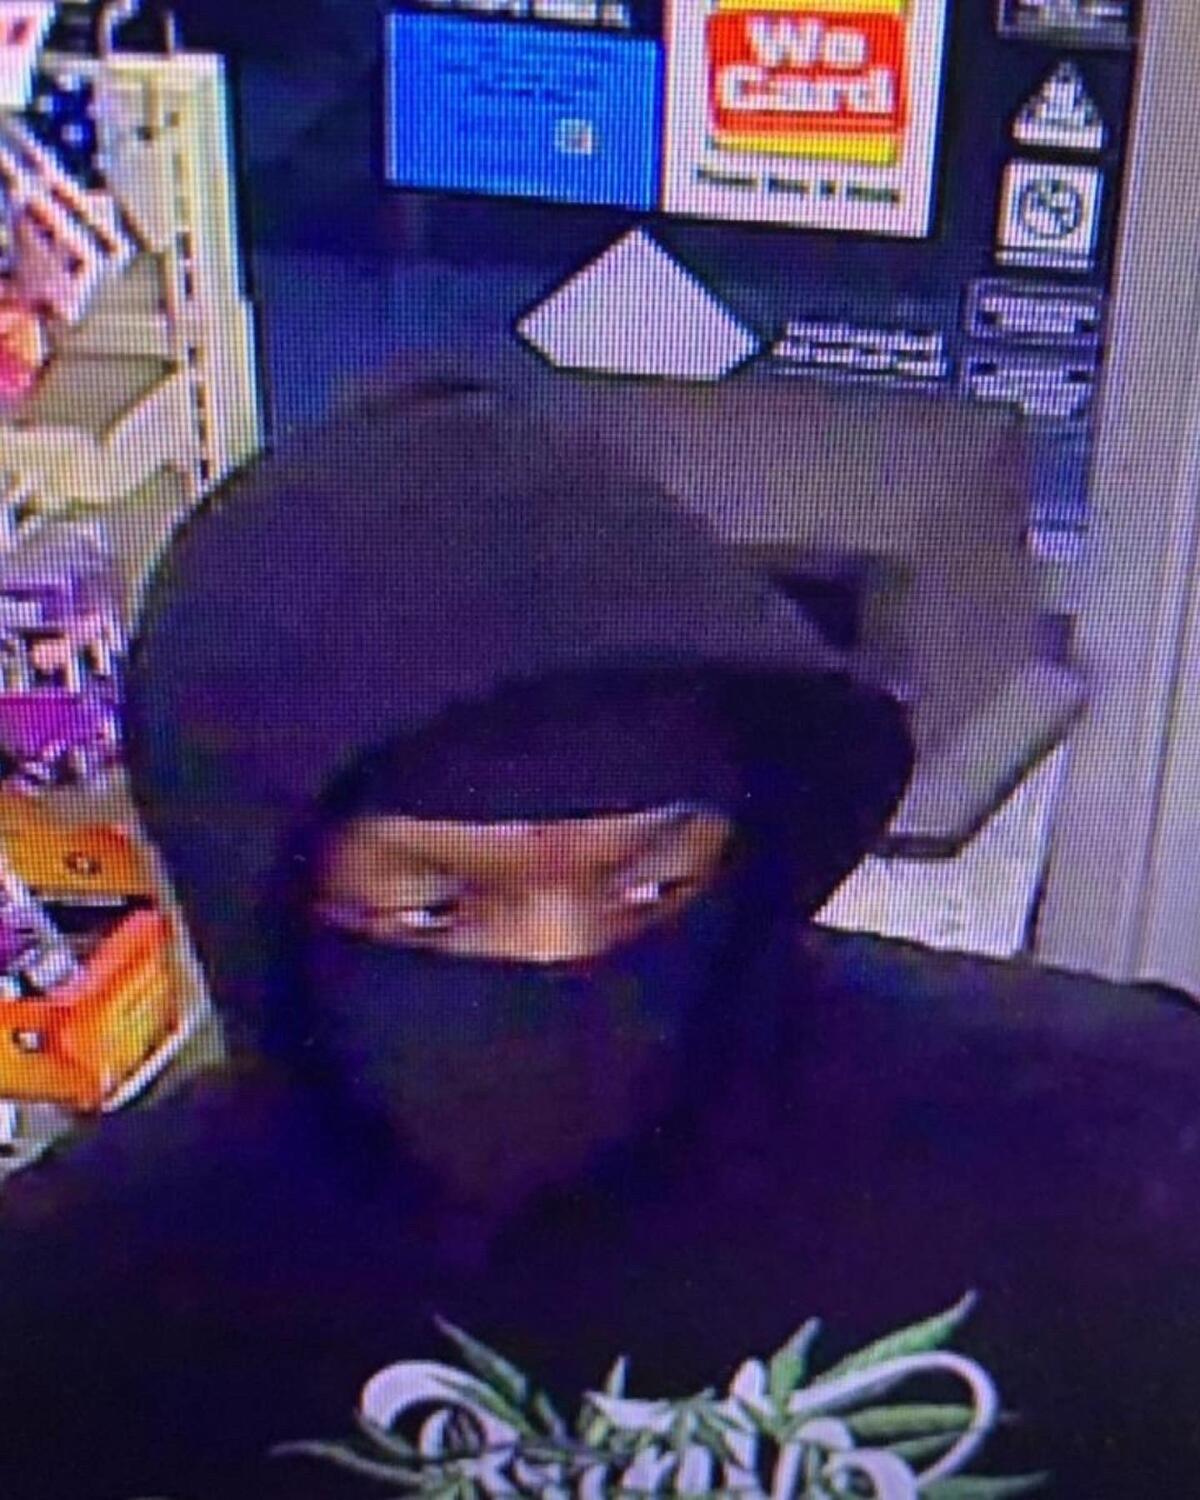 A man in a mask and dark hooded sweatshirt in convenience store security video